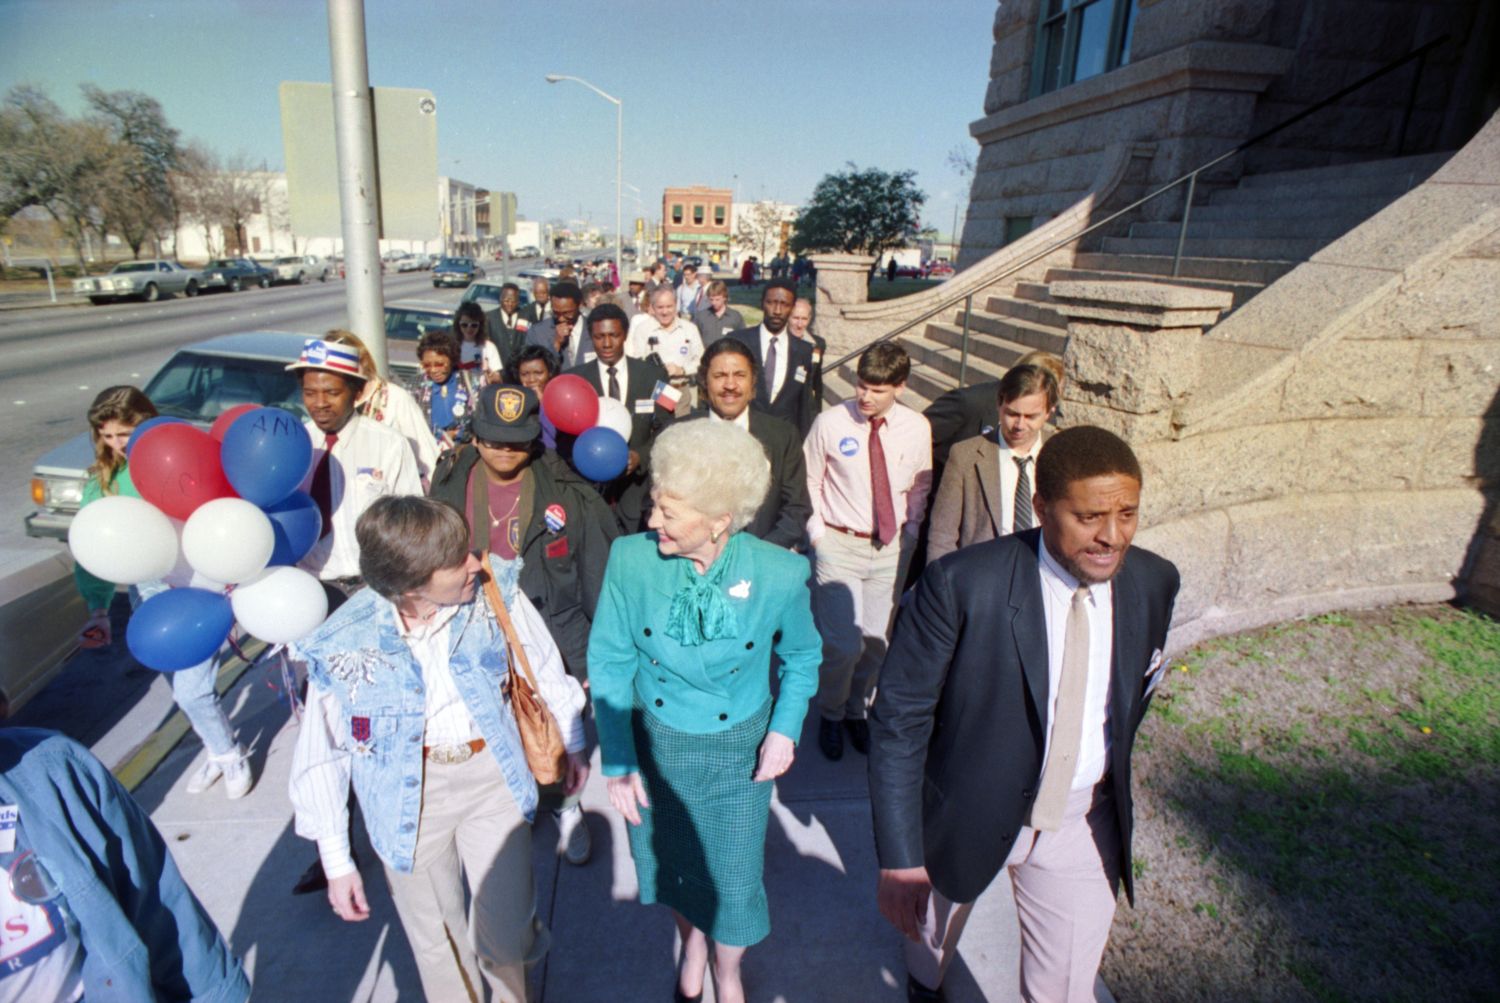 Ann Richards, center, leads supporters on a march from the Tarrant County Courthouse to an absentee voting site at 600 Belknap St. during a campaign visit to Fort Worth.